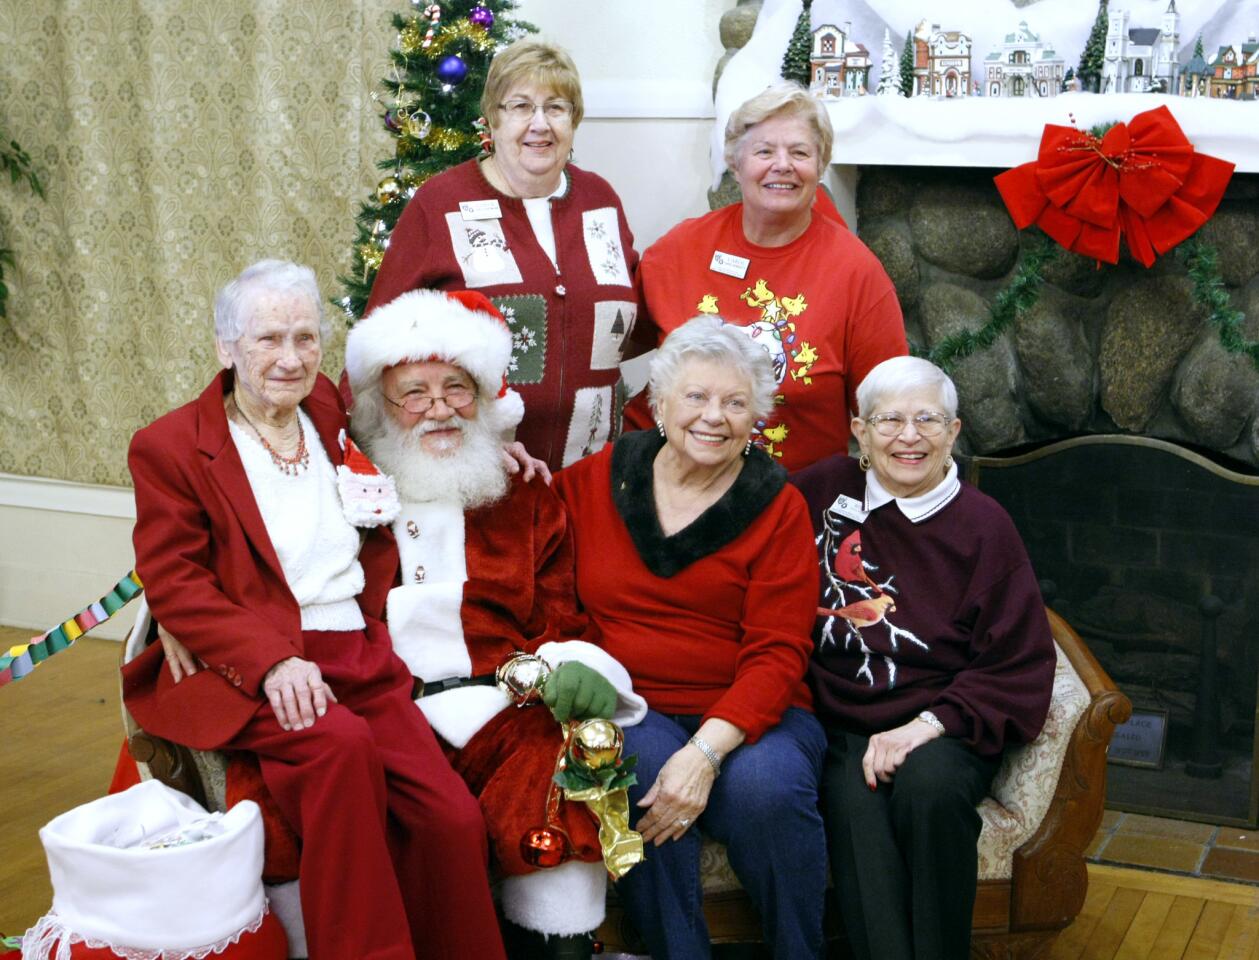 Taking a photo with Santa Claus are, top row from left, La Crescenta Woman's Club past president Carol Huntwork and Carol Benedetti, and front row from left are Jean Bates, 96, Dea McCrory and Rita Even, at the annual La Crescenta Woman's Club Breakfast with Santa, at the organization's clubhouse in La Crescenta on Saturday, Dec. 10, 2016.